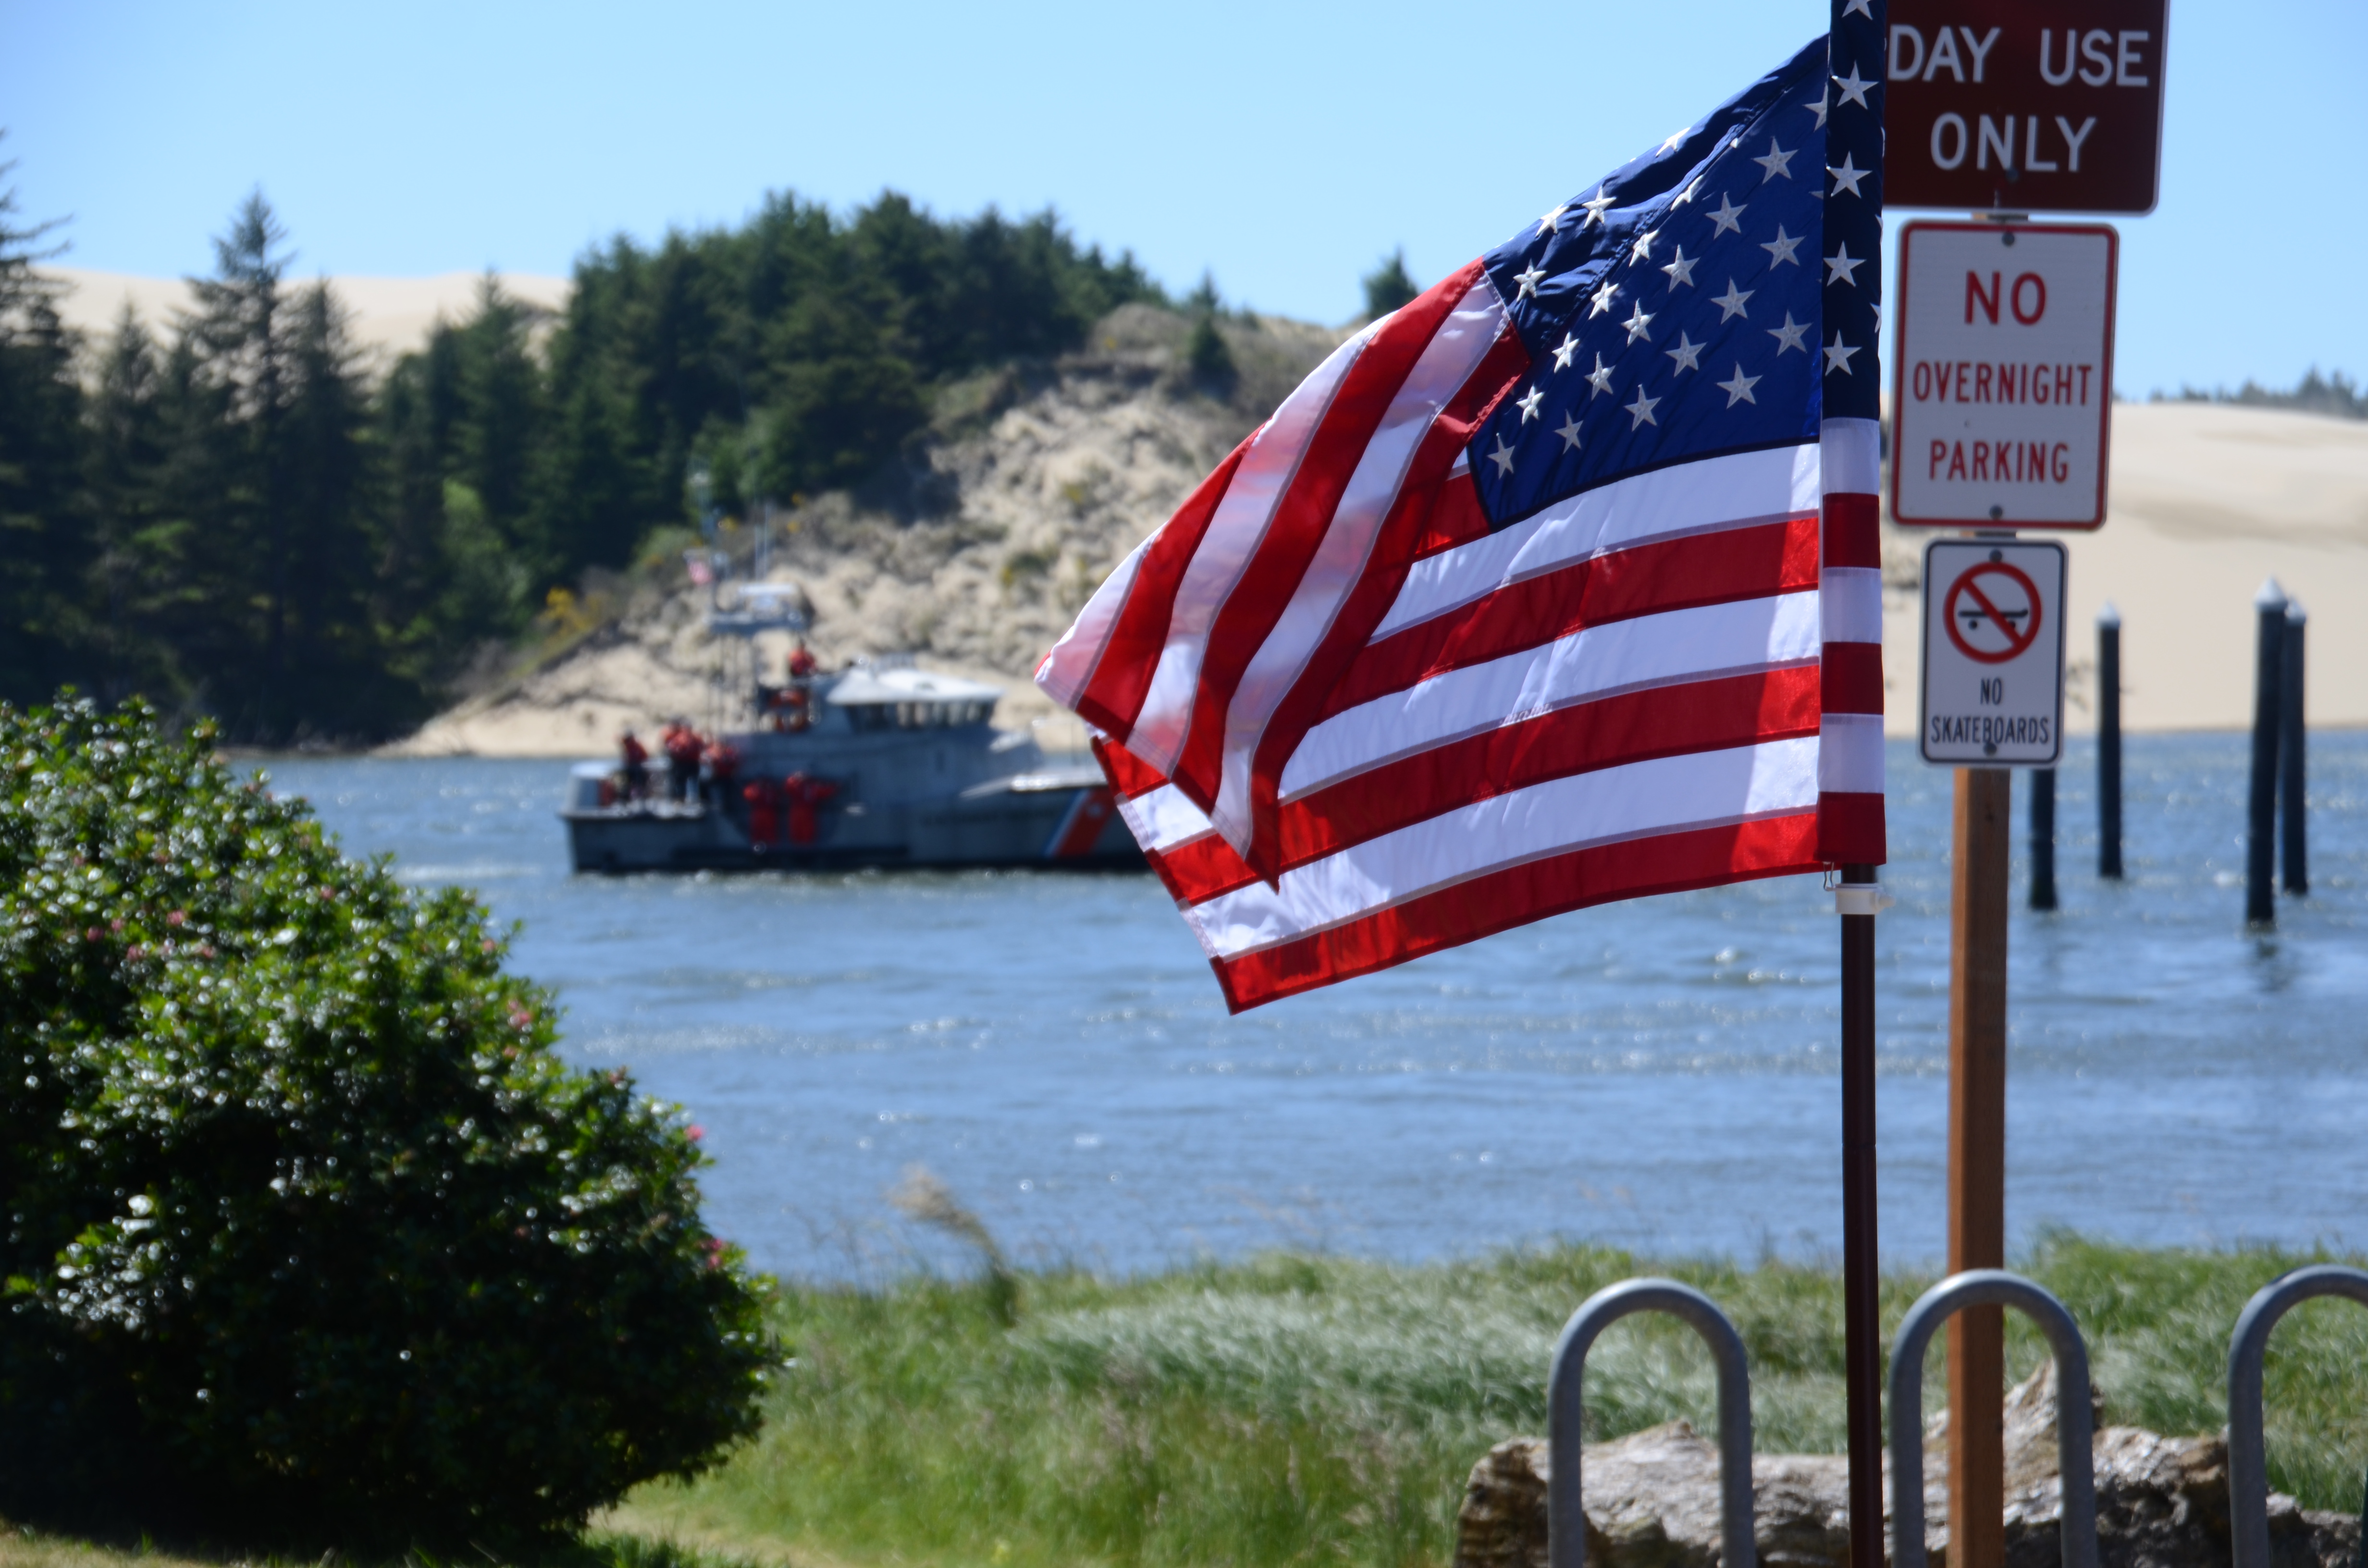 Coast Guard Vessel preparing to lay Wreaths on the Siuslaw River Florence OR, on Memorial Day 2018